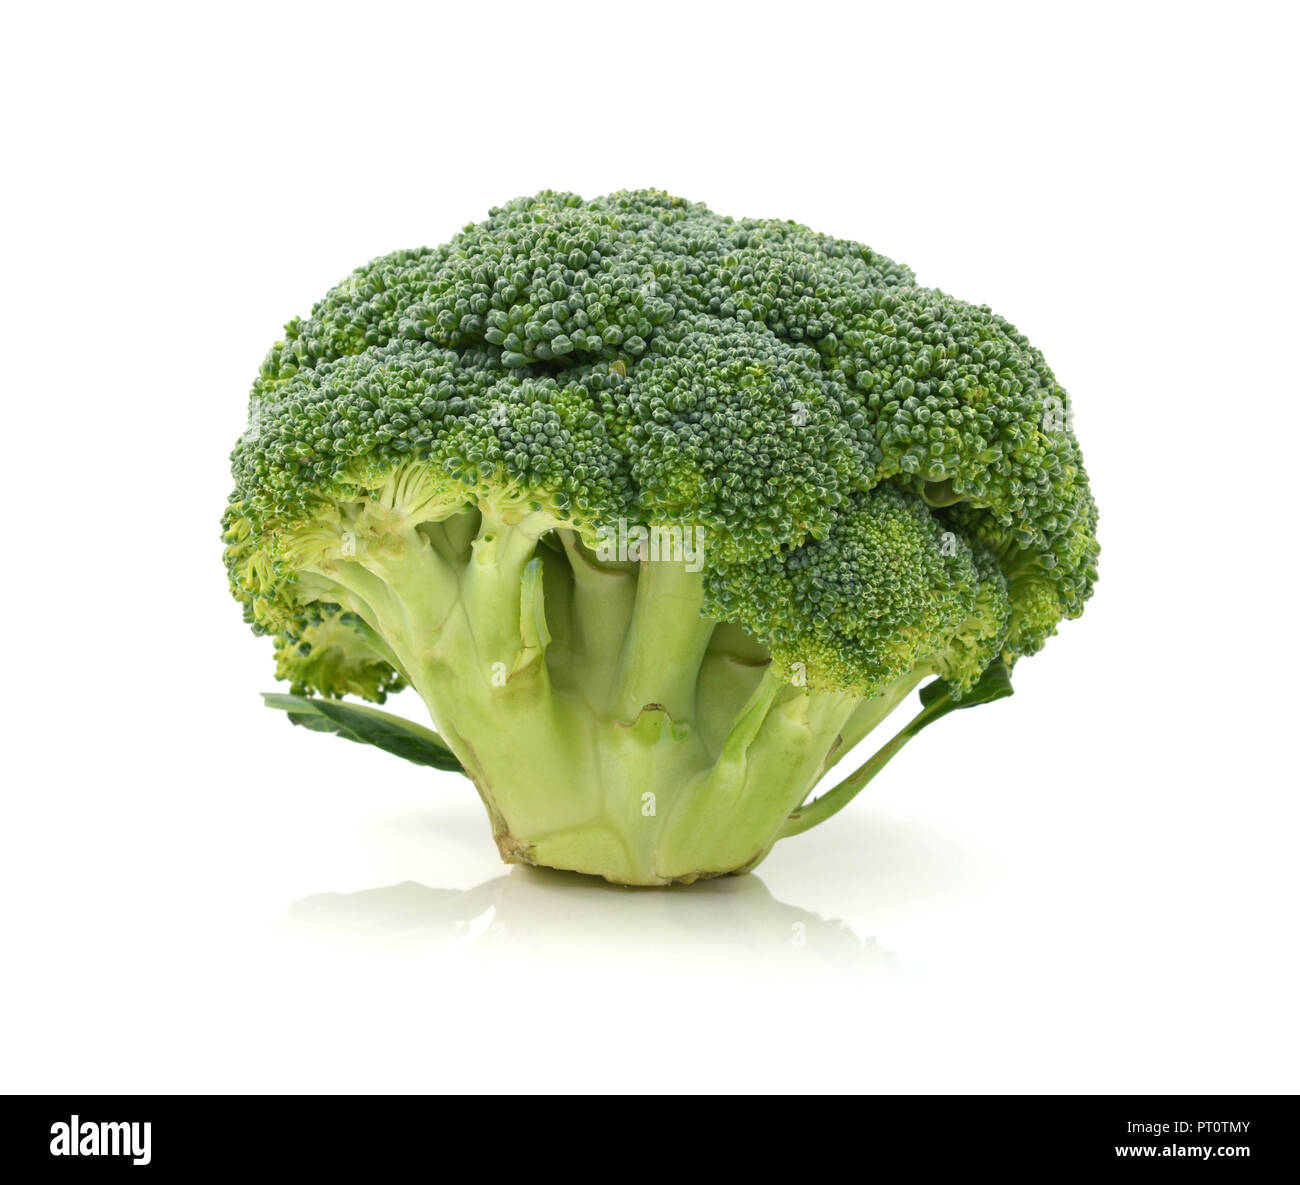 Fresh head of calabrese broccoli standing upright show individual florets and stalks on a white background Stock Photo